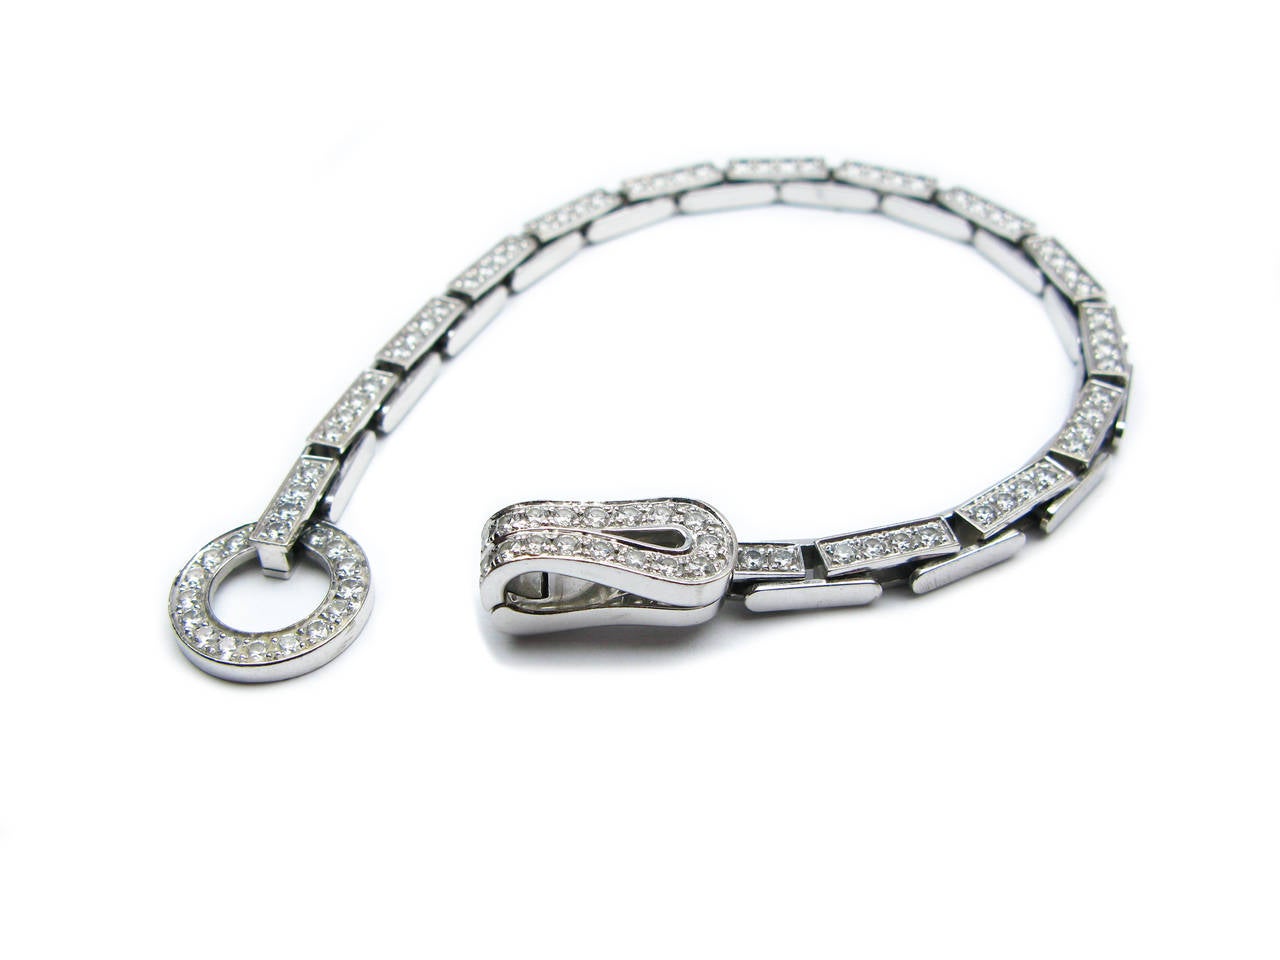 This lovely Cartier signed Agrafe Collection bracelet features high quality white diamonds set in 18kt white gold. 